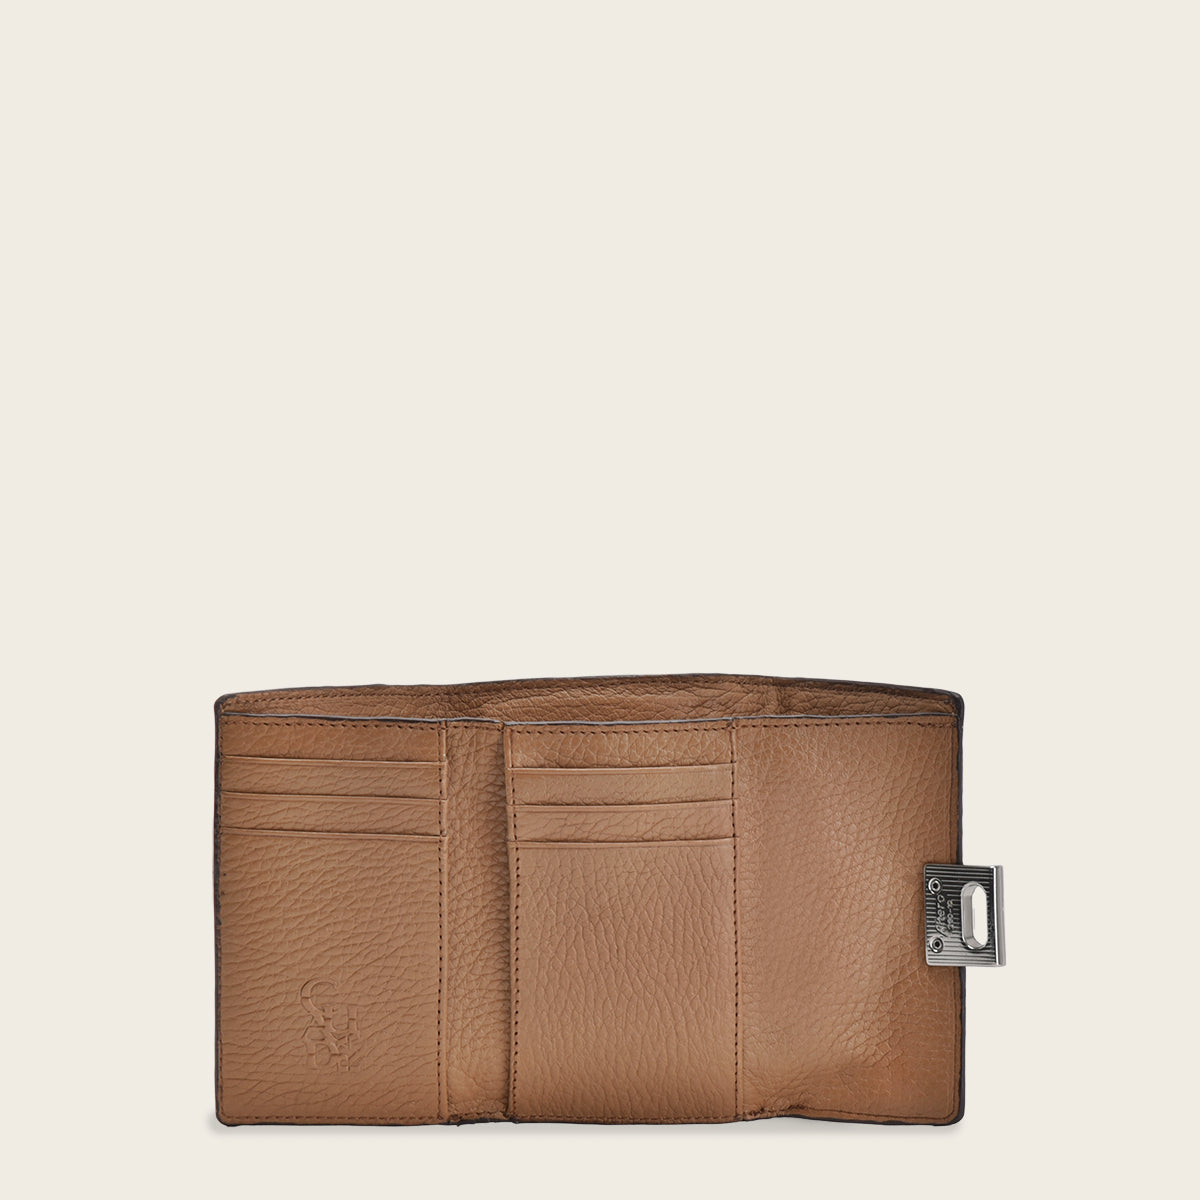 Brown exotic leather trifold wallet